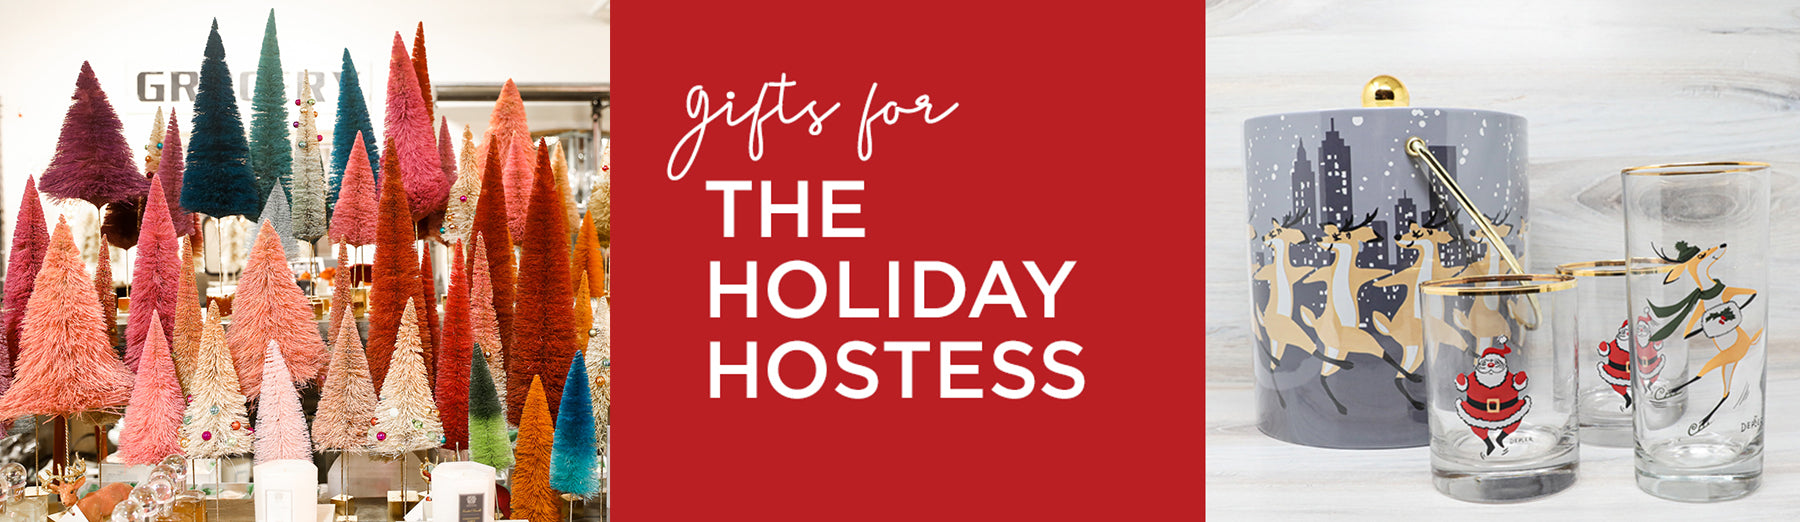 HOLIDAY GIFT GUIDE: THE HOSTESS